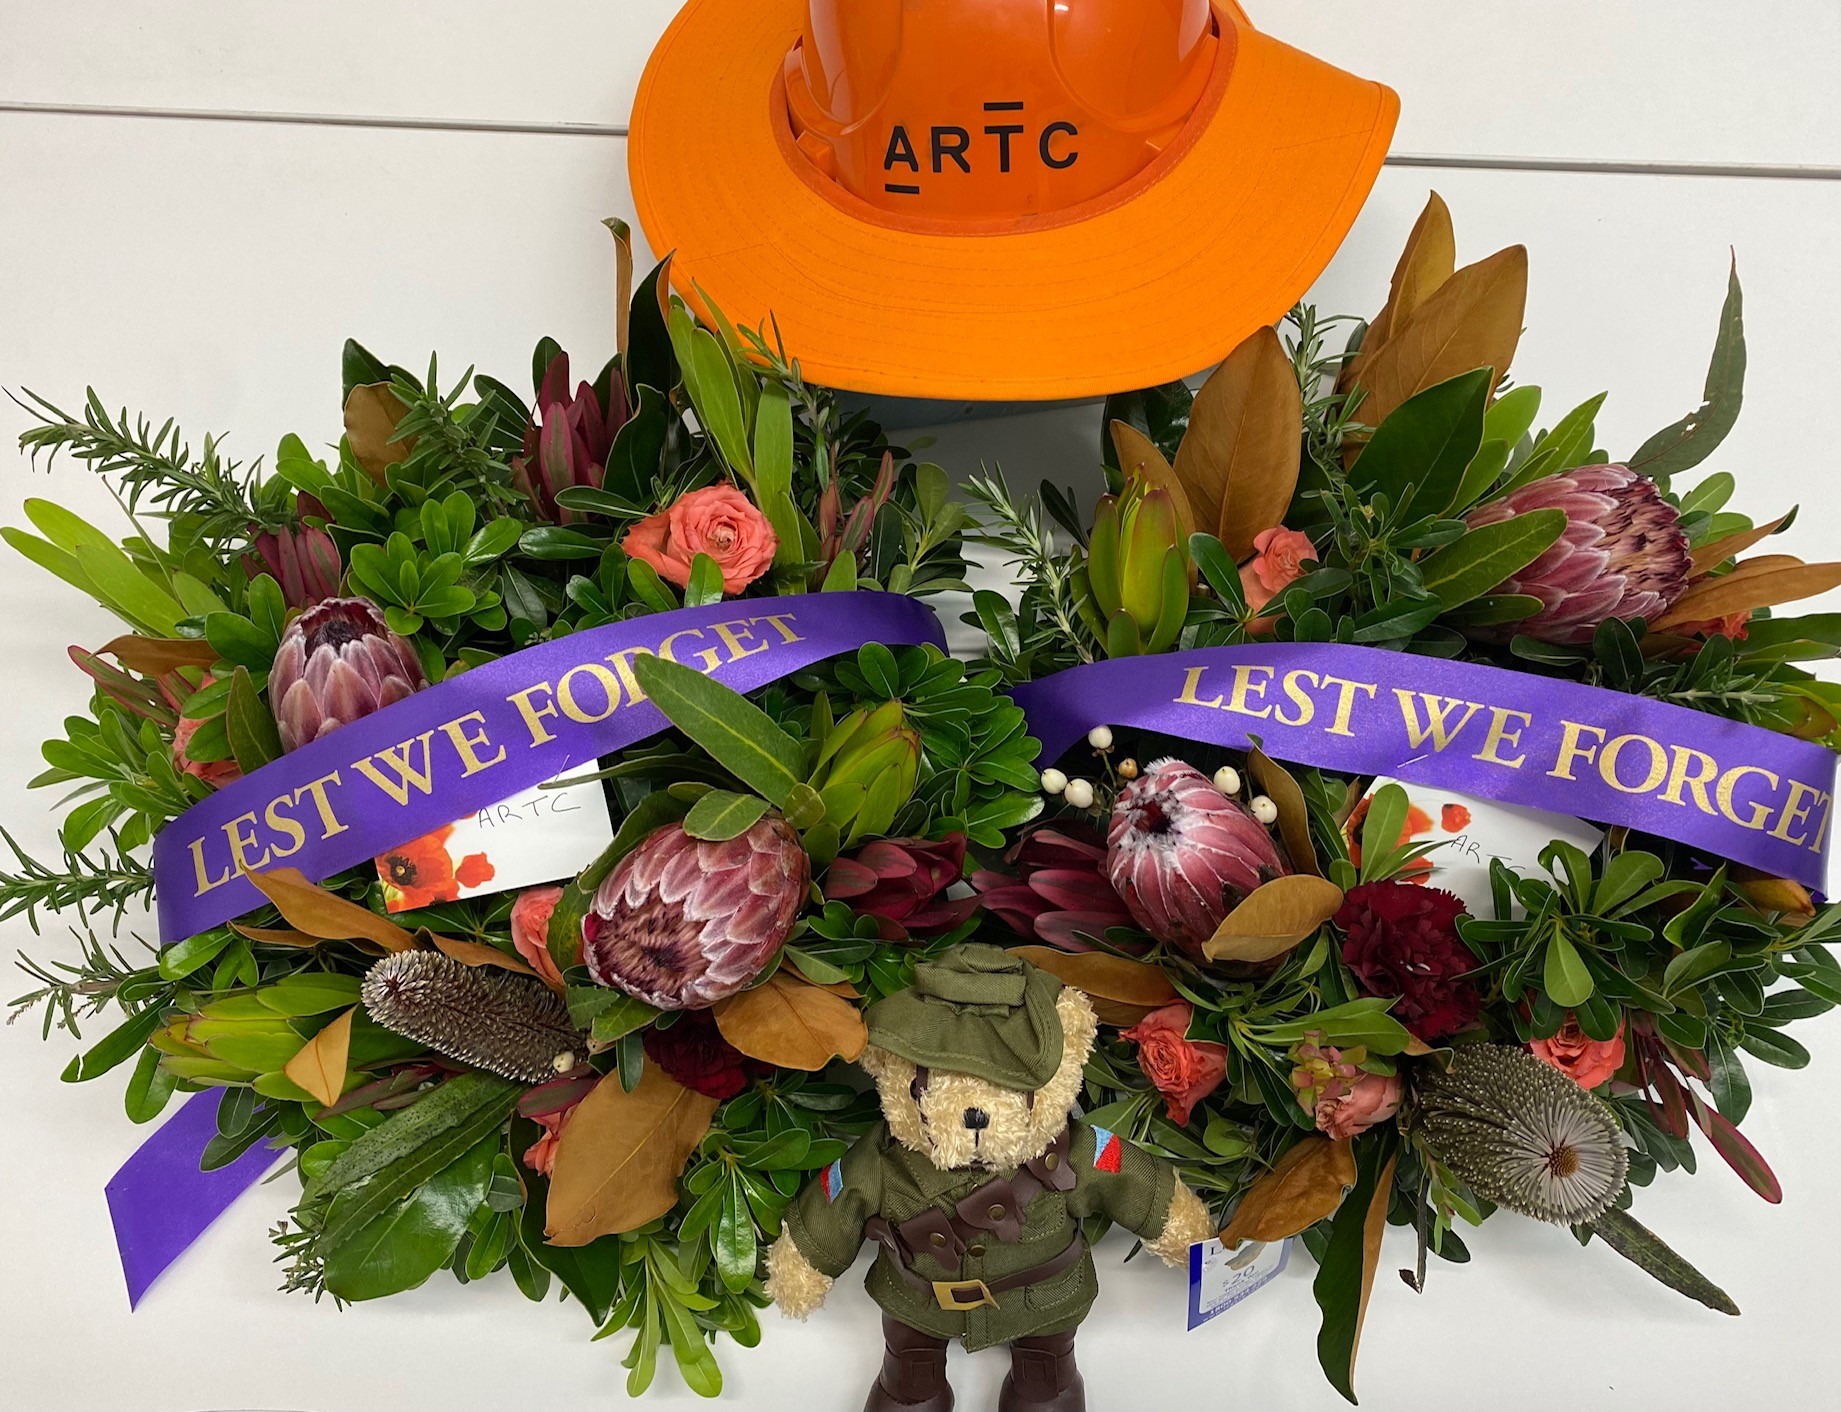 Wreath donated by ARTC to commemorate ANZAC day